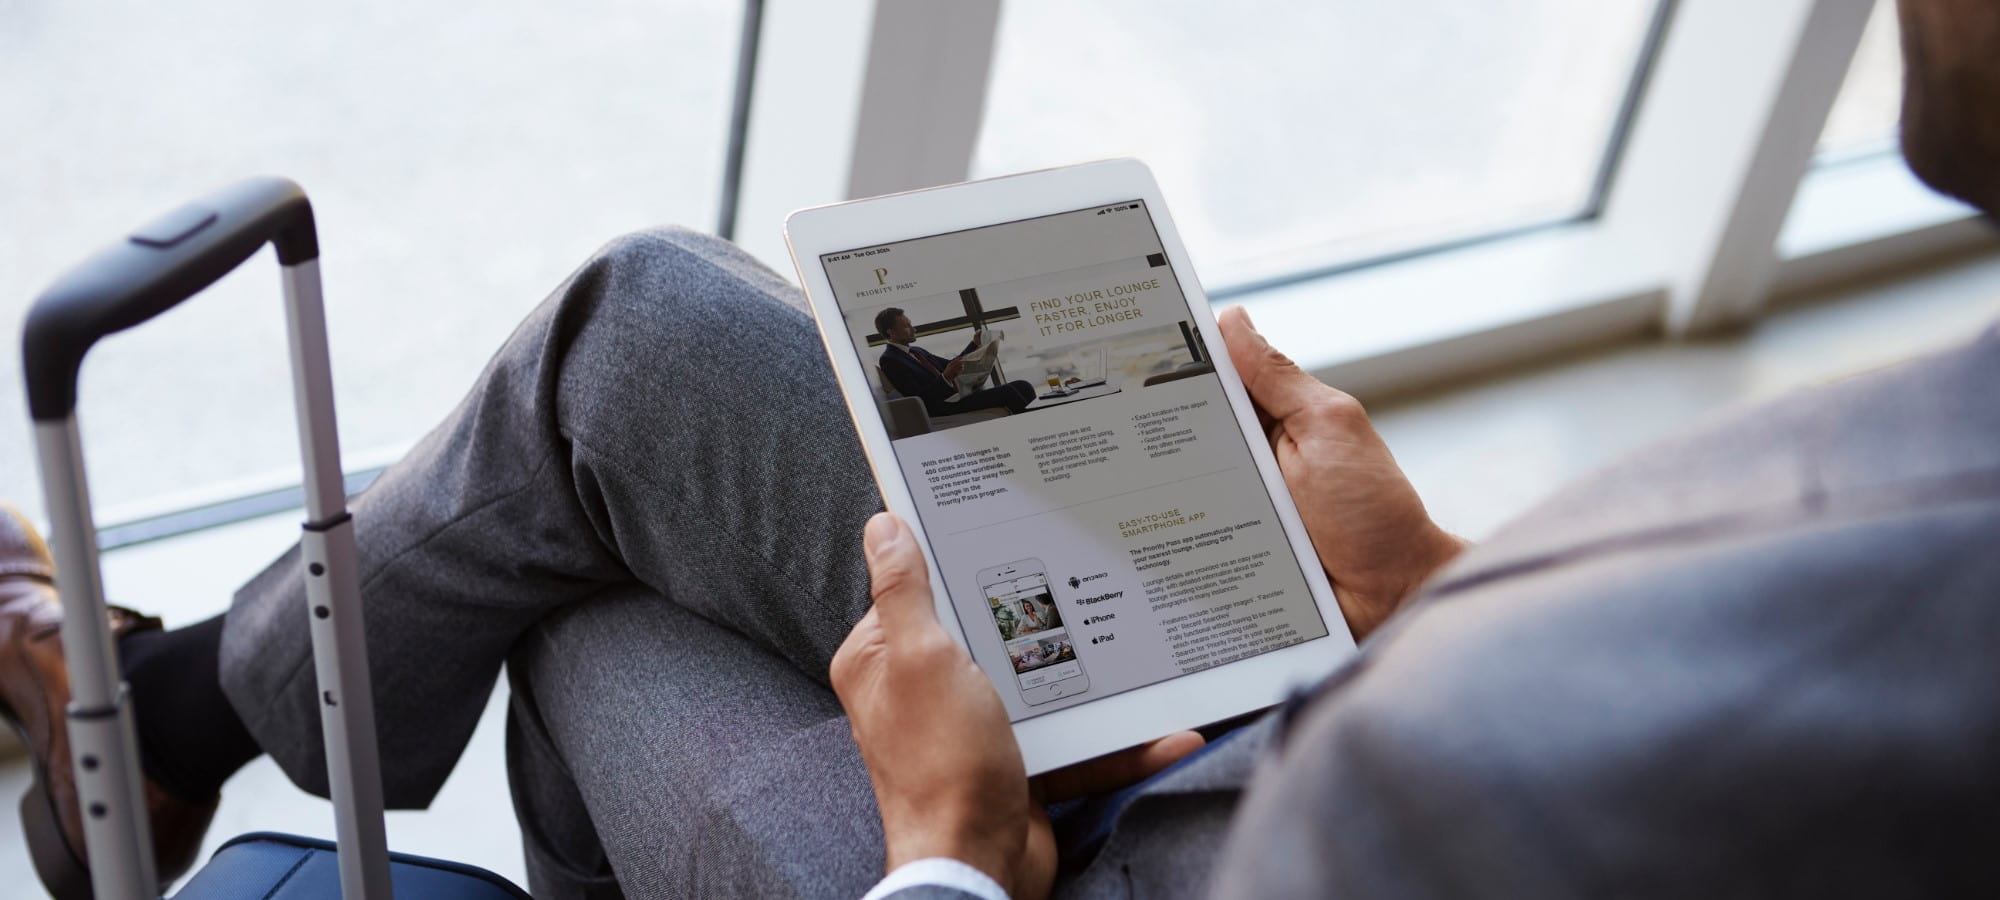 Man reading priority pass website on tablet in airport lounge